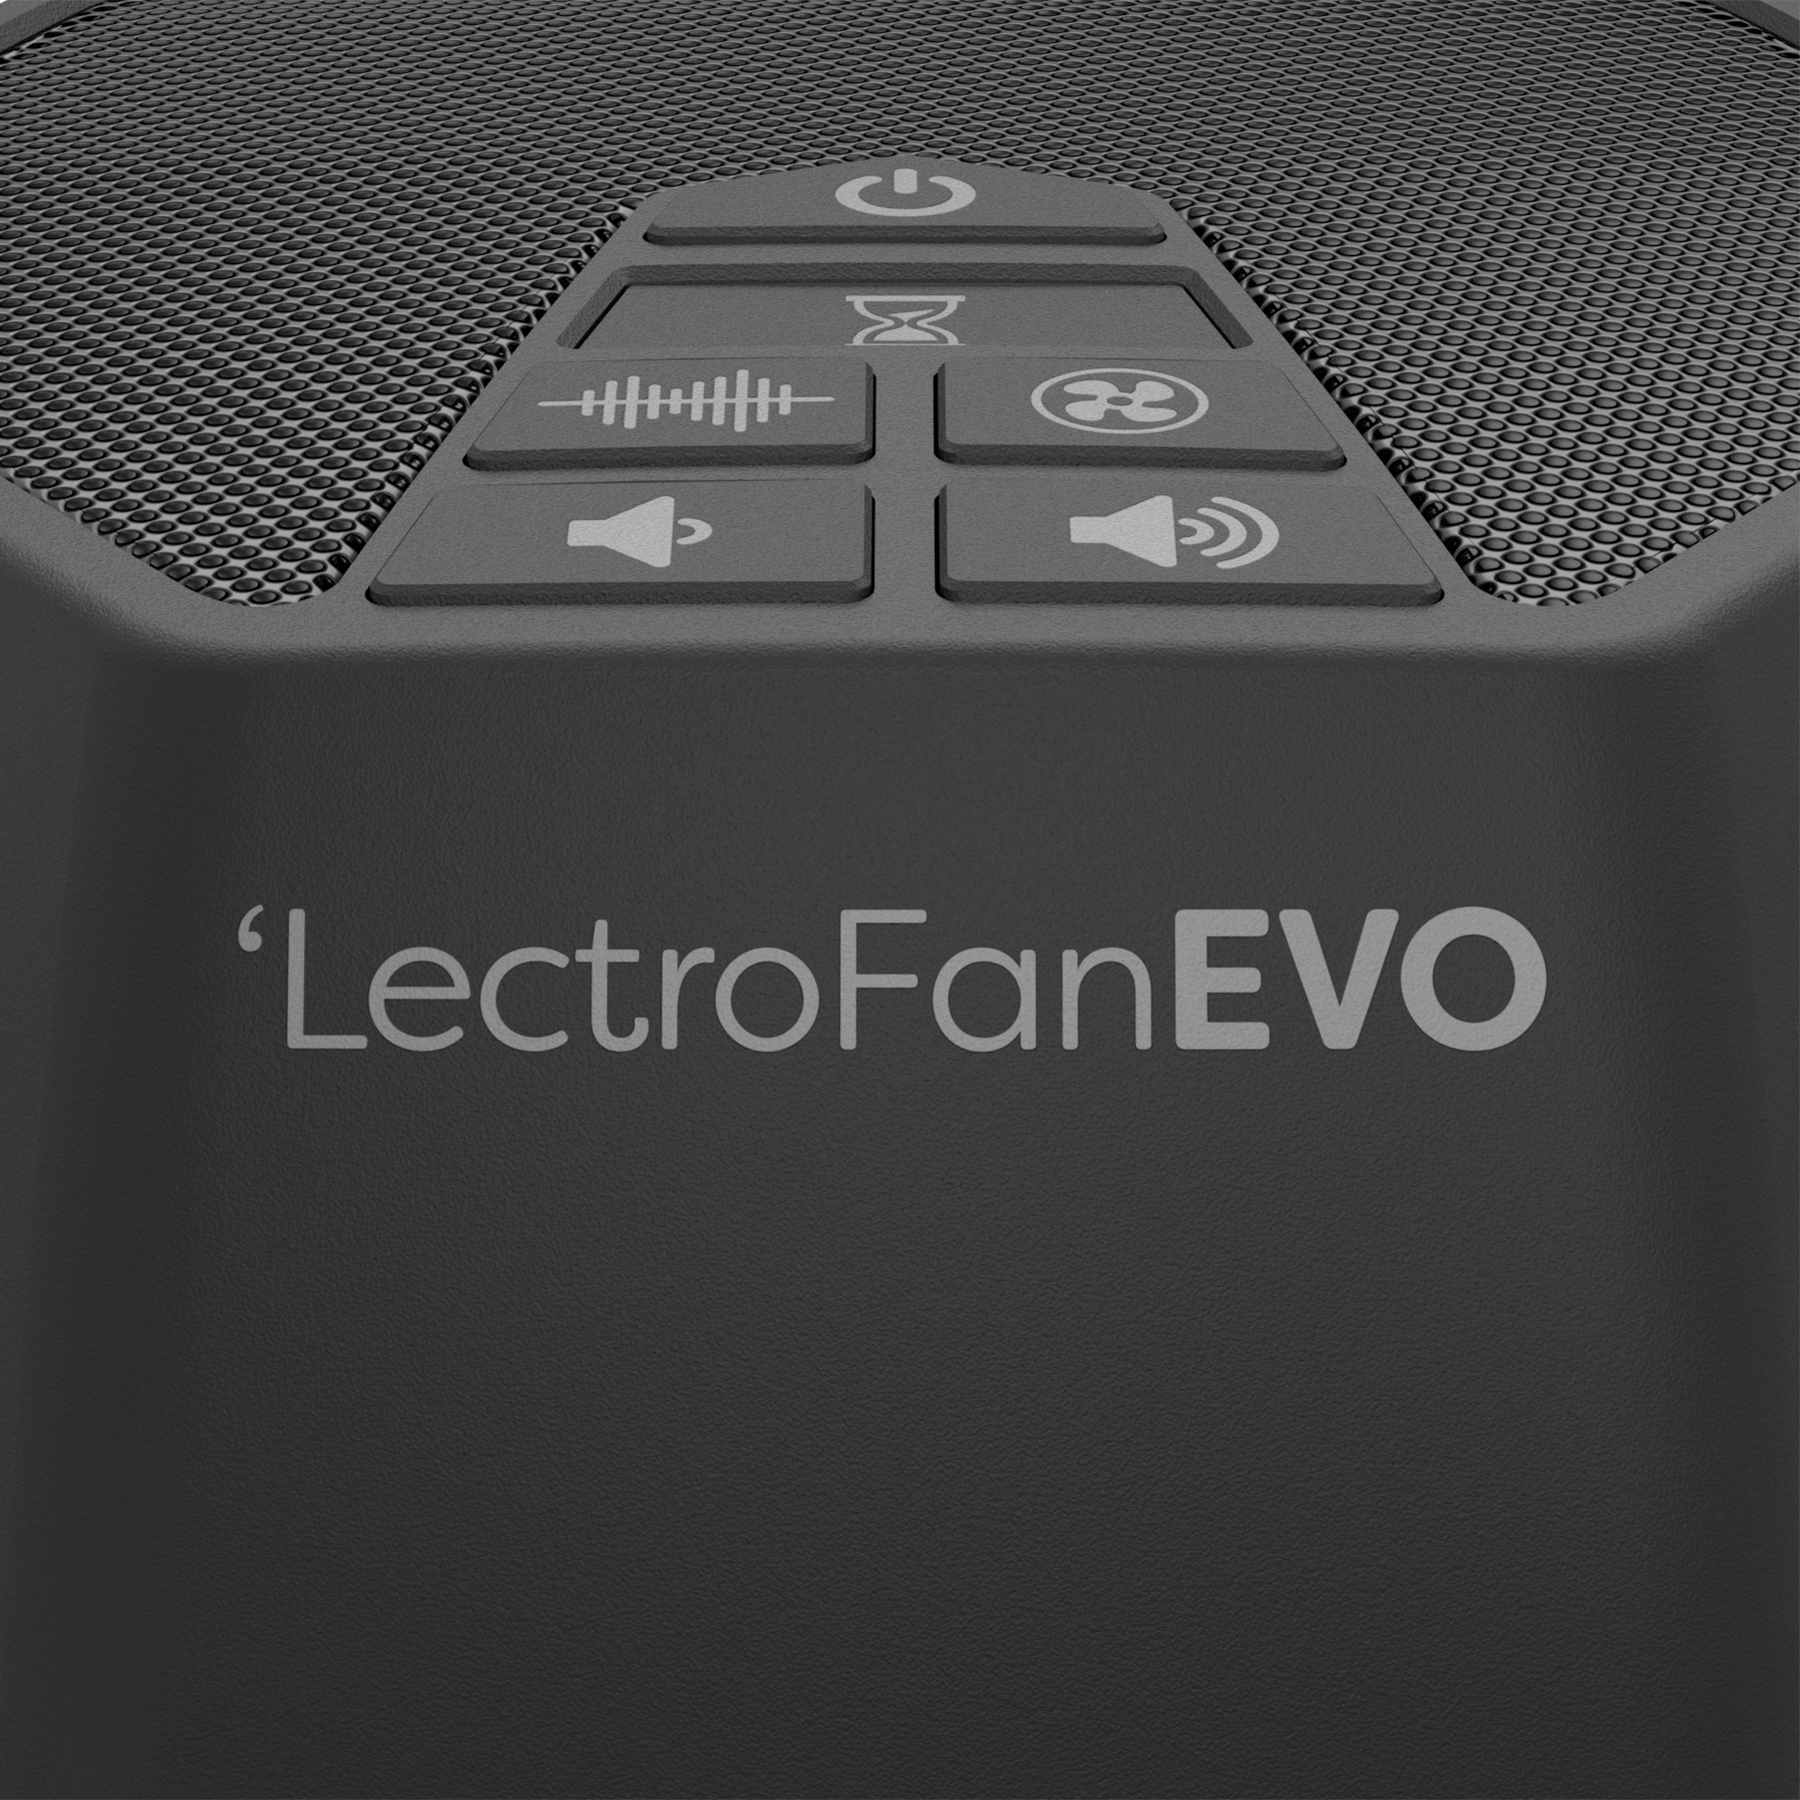 LectroFan EVO: Sound & Noise Machine For Sleep, Rest and Relaxation - Black - image 5 of 5